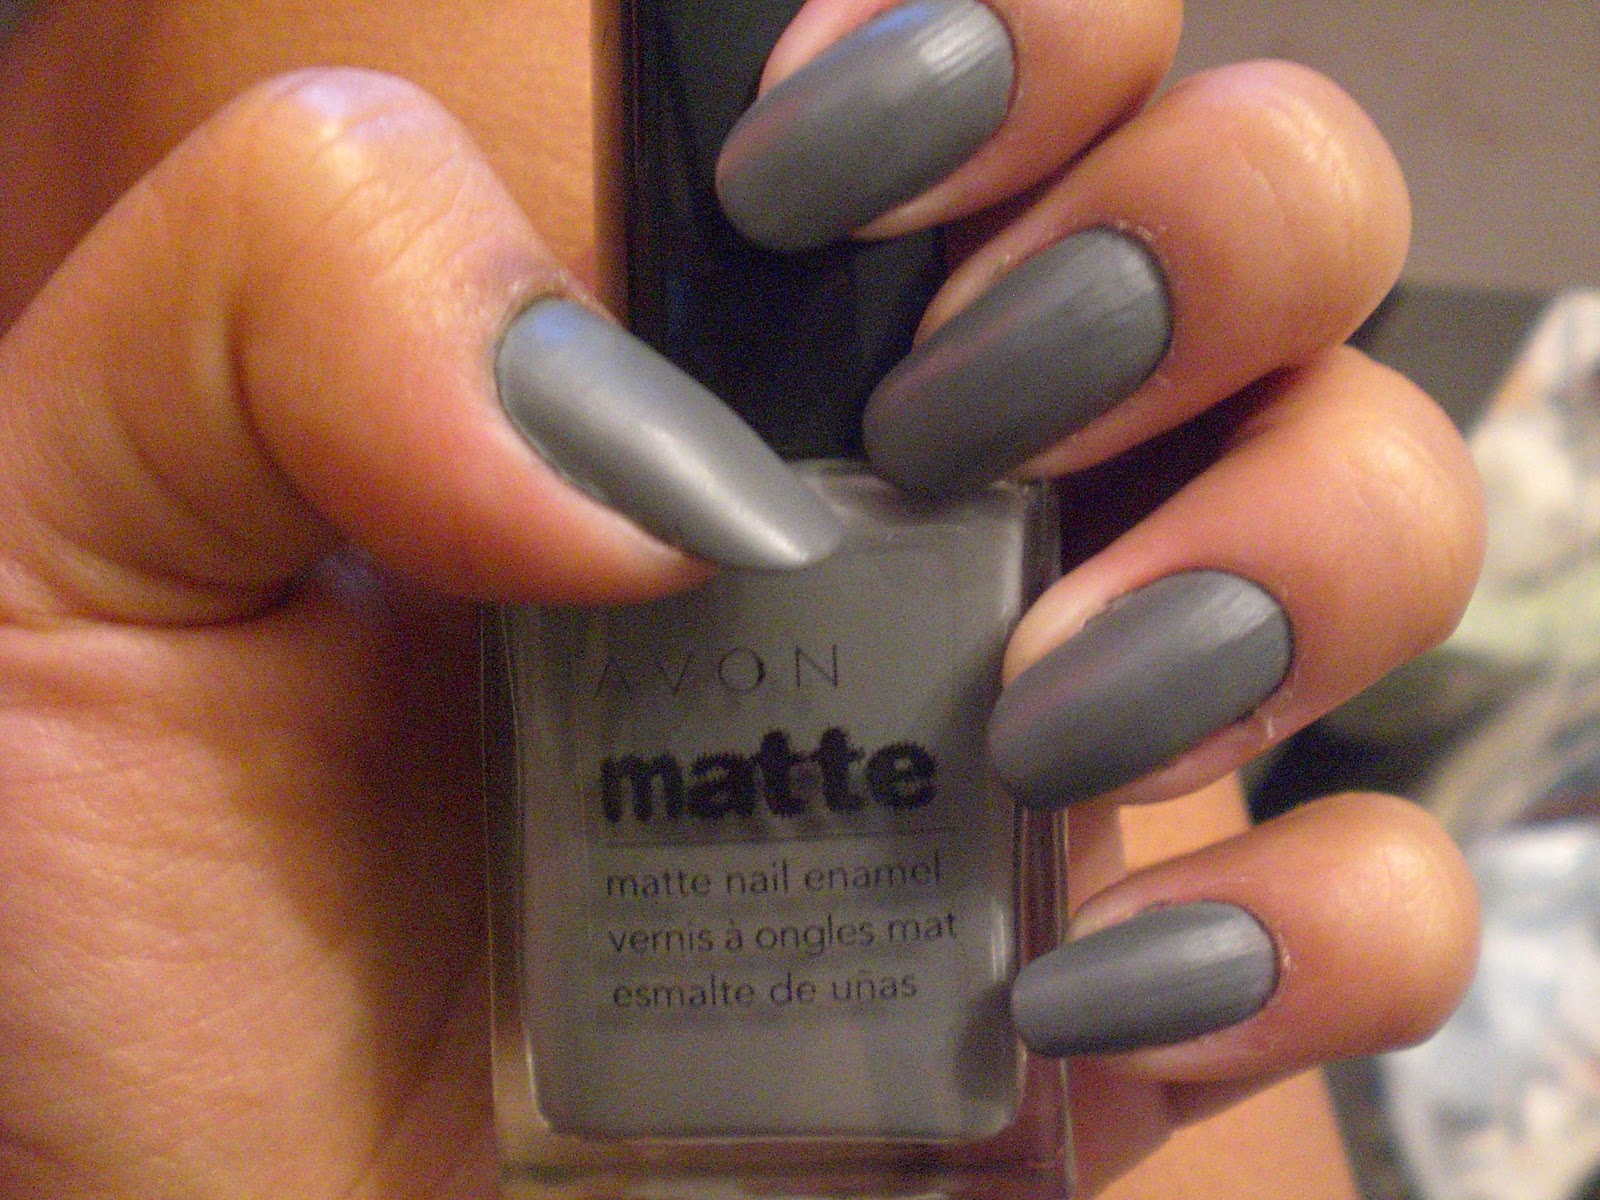 1. "Best Matte Nail Colors for Summer" - wide 6